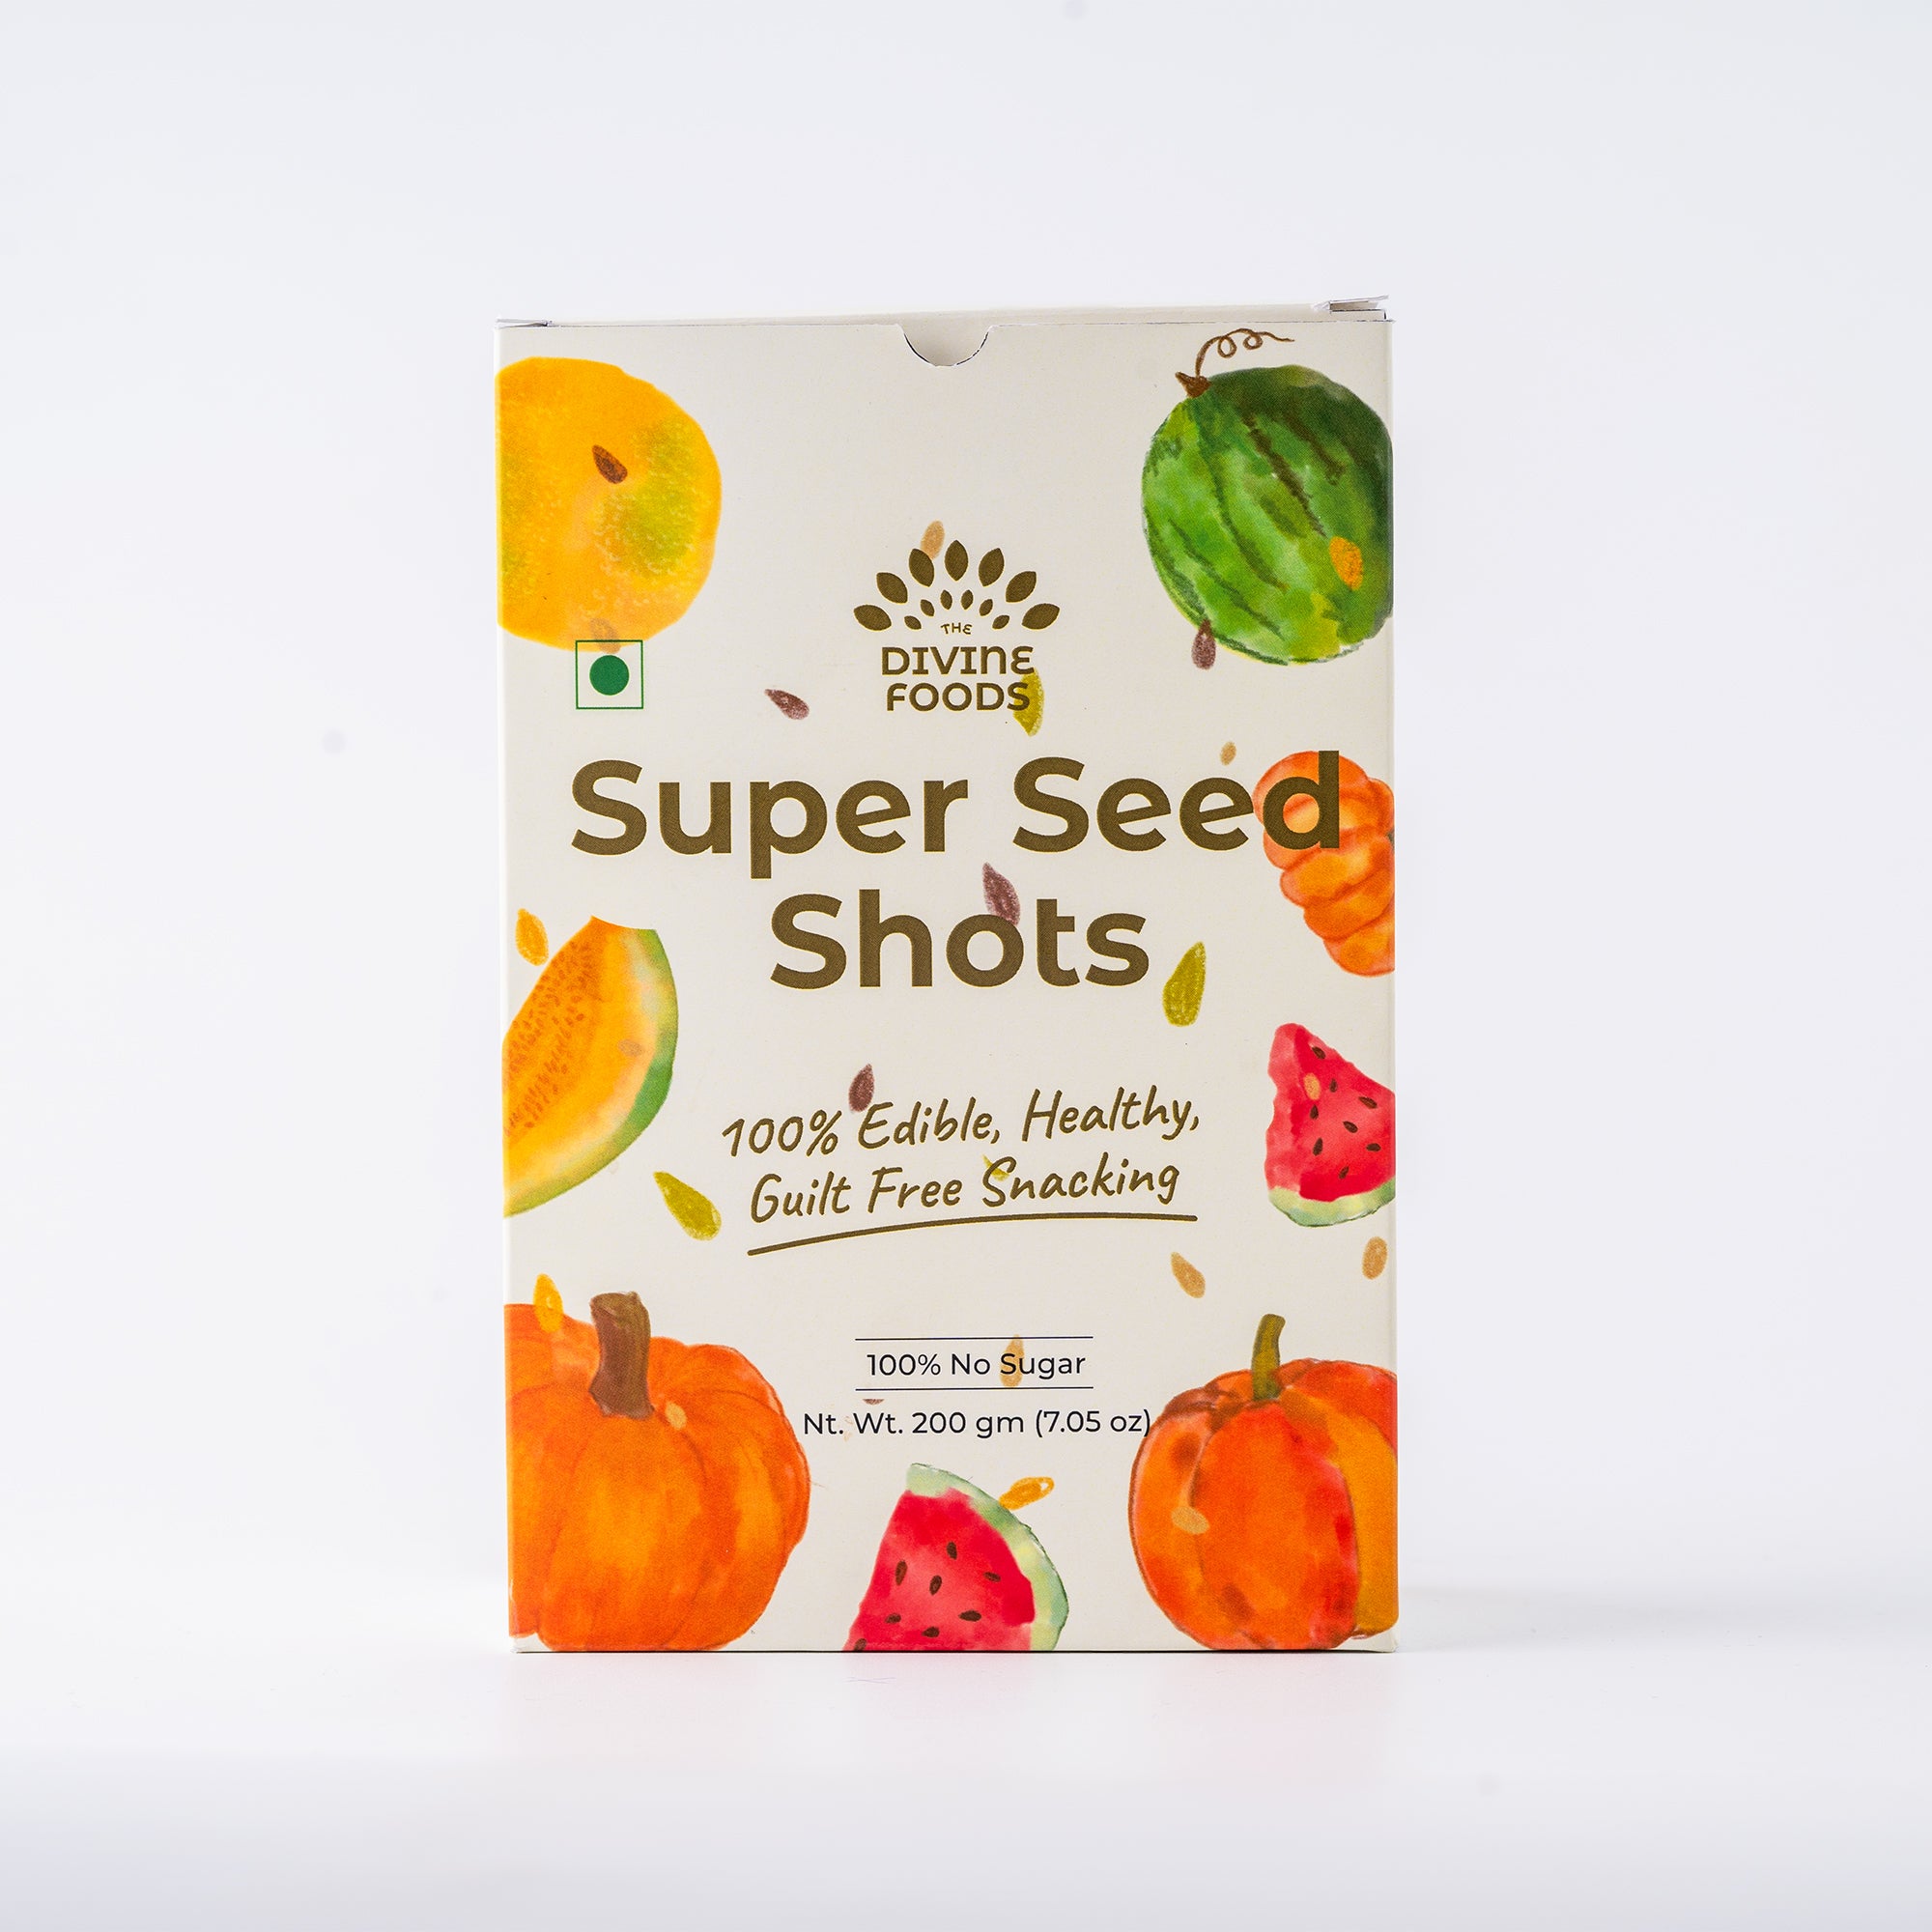 Super Seeds Shots (Natural Remedy For Hair Growth) Guilty Free Snacking Made With 5 Premium Seeds